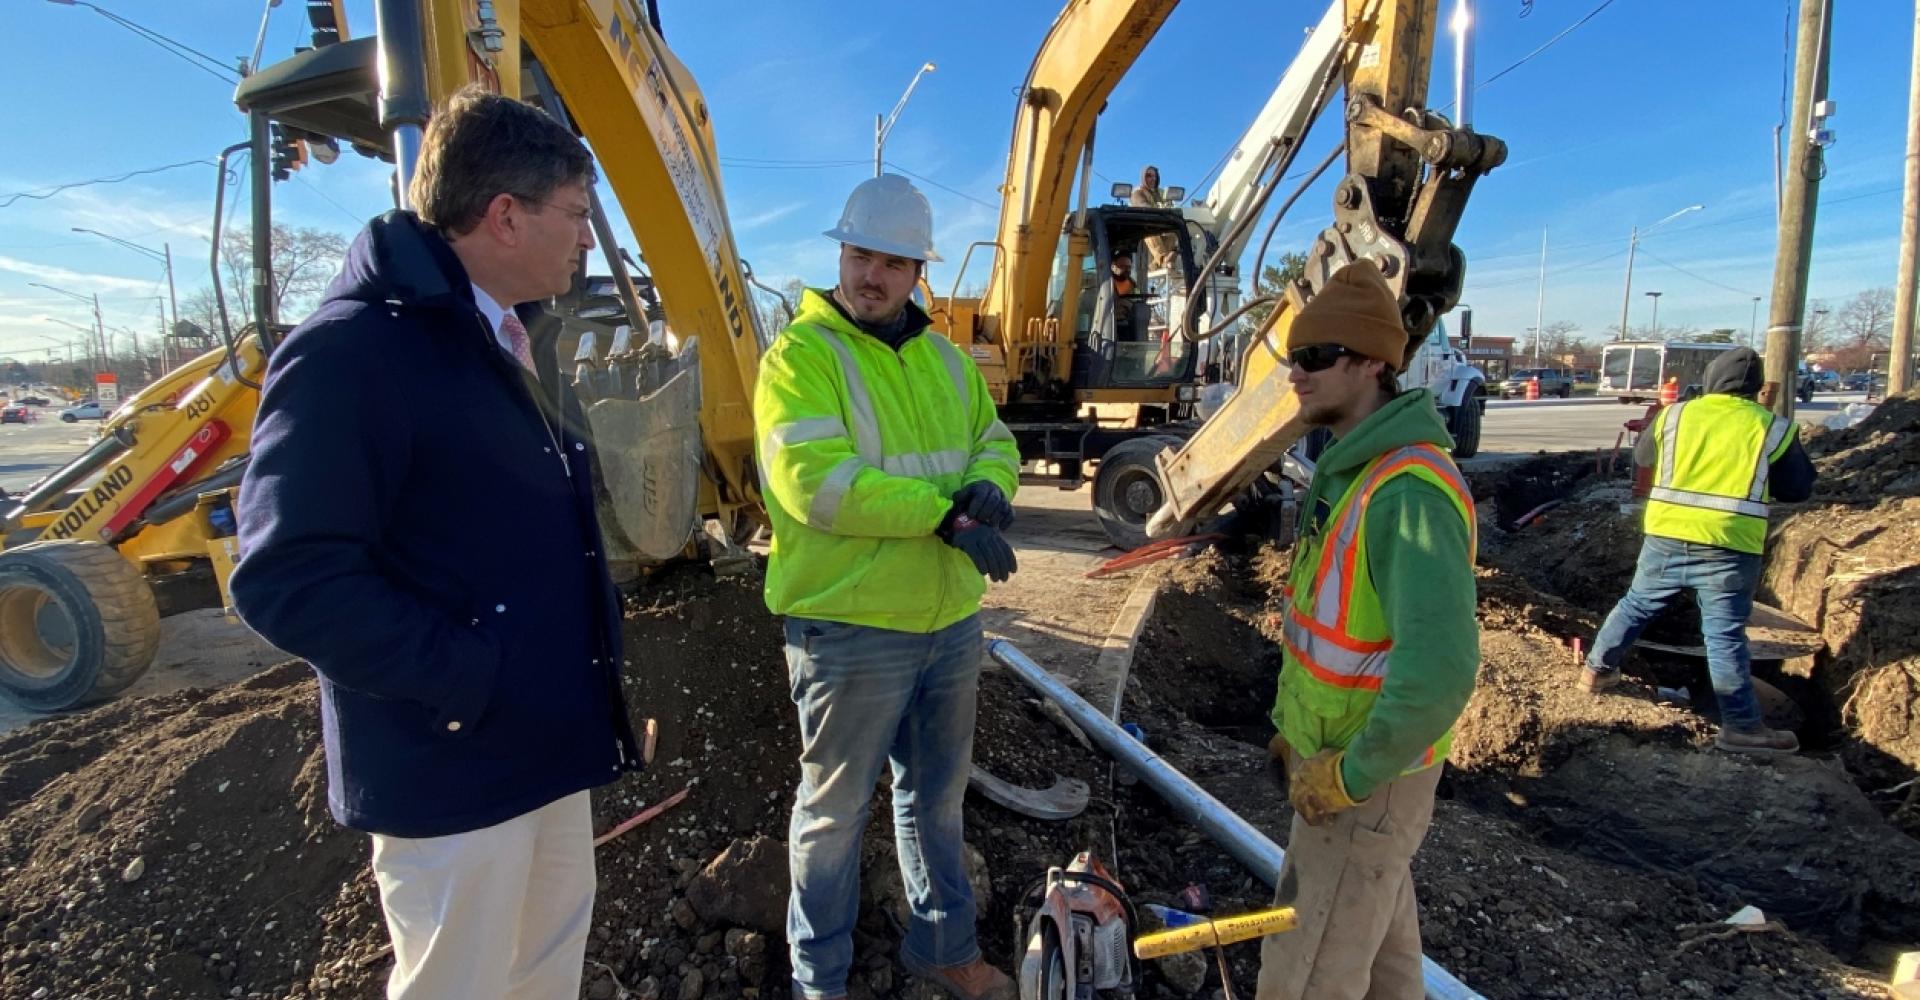 Rep. Schneider with infrastructure workers